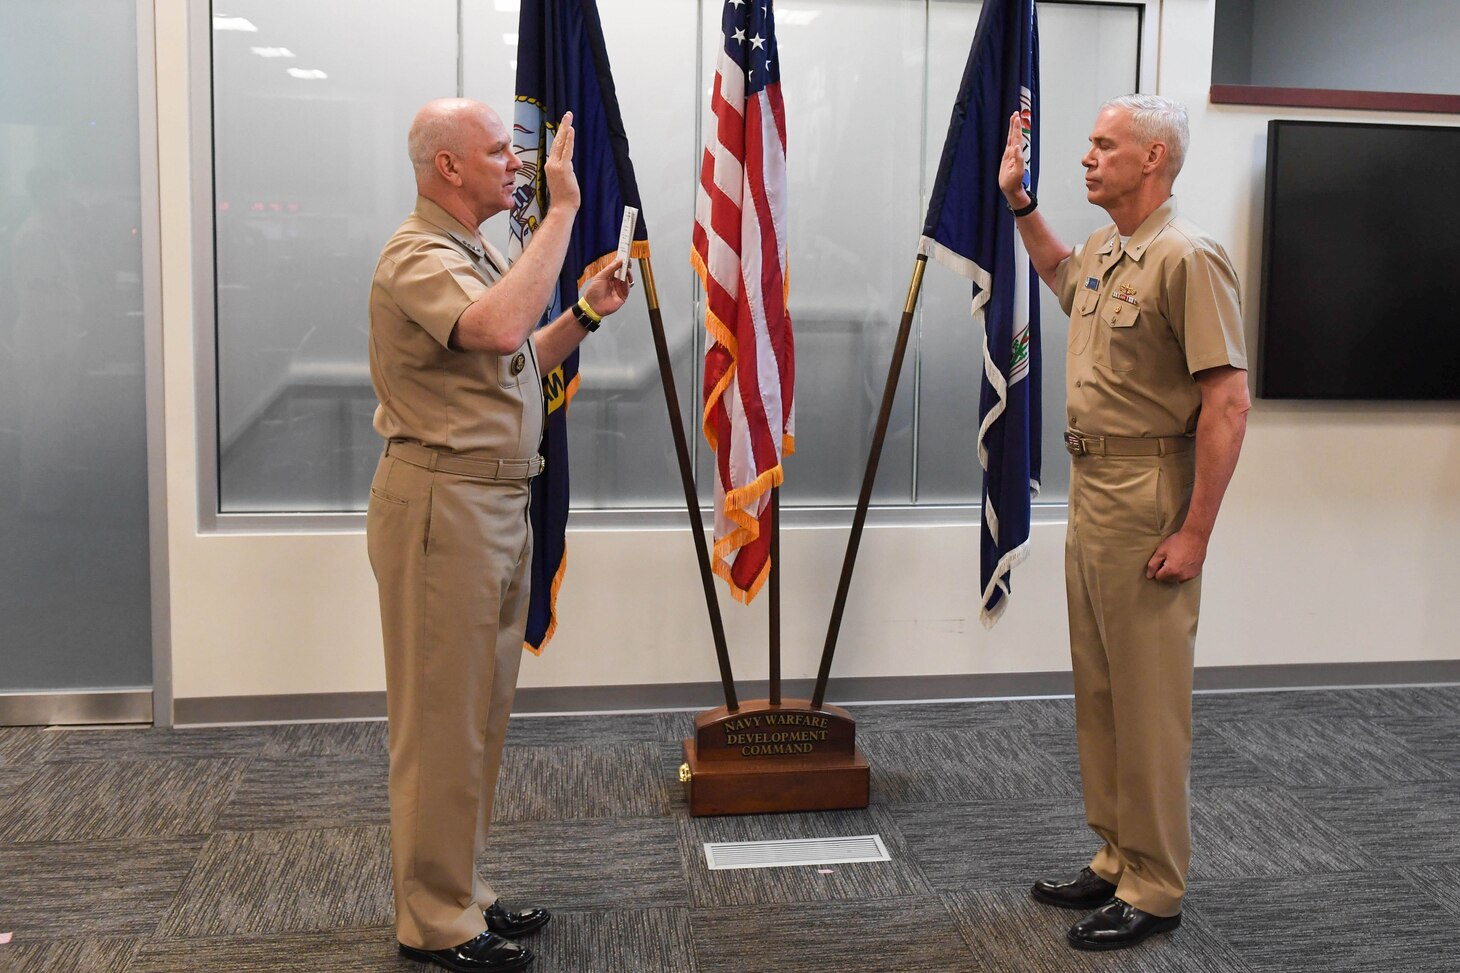 Admiral Christopher W. Grady, left, U.S. Fleet Forces commander, promotes Rear Admiral Fred I. Pyle in a frocking ceremony at Navy Warfare Development Command. The promotion of Pyle, NWDC commander, will be effective August 1, 2020. He is a native of McAlisterville, Pa., and a 1990 graduate of Pennsylvania State University. 
Frocking is the Navy’s practice of allowing promotion selectees to wear the insignia of the higher grade before the official date of promotion.  For an expanded discussion on the origins of this practice, please visit the Naval History and Heritage Command at https://www.history.navy.mil/research/library/online-reading-room/title-list-alphabetically/f/frocking.html.
(U.S. Navy photo by MC1 Jason Pastrik, NWDC/Released)